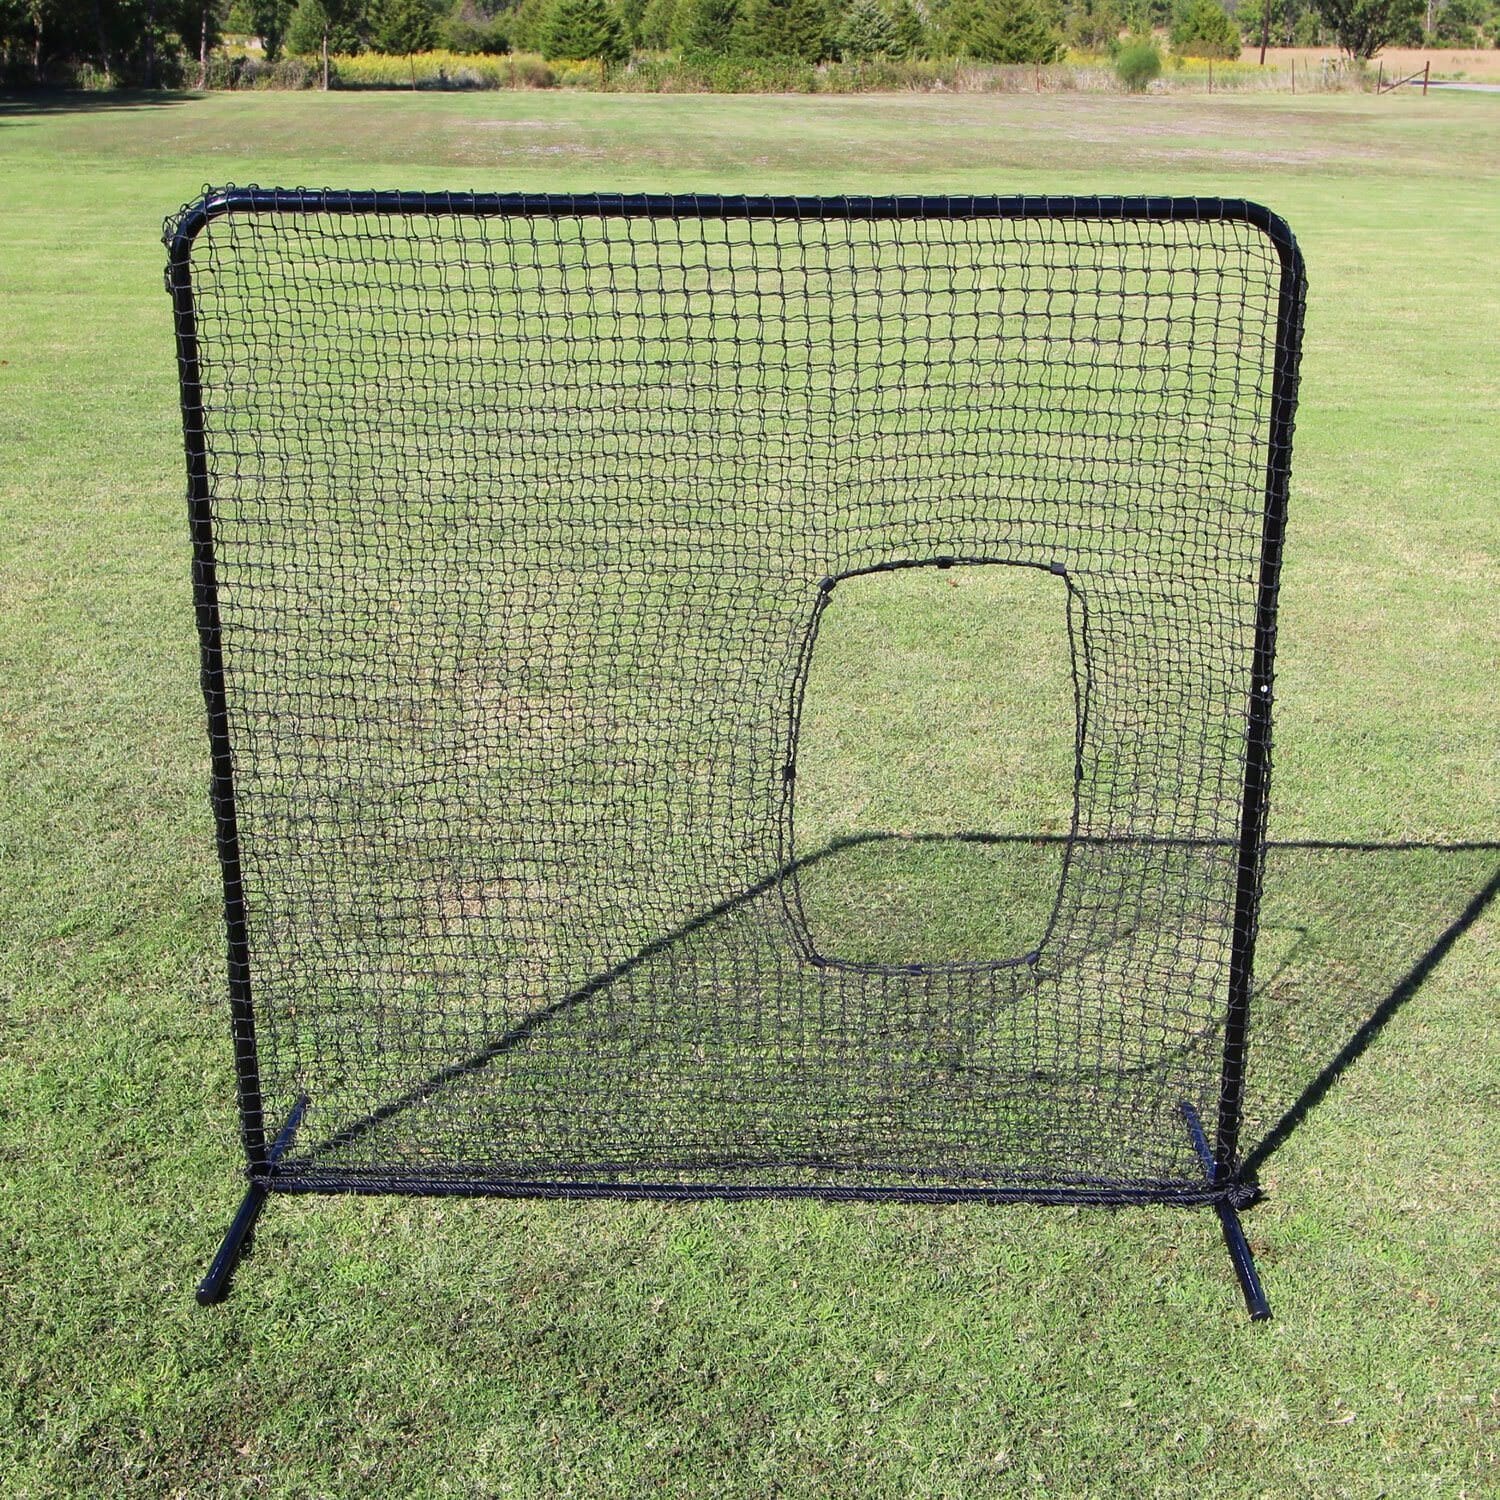 7' x 7' Softball Net with Commercial Frame front view